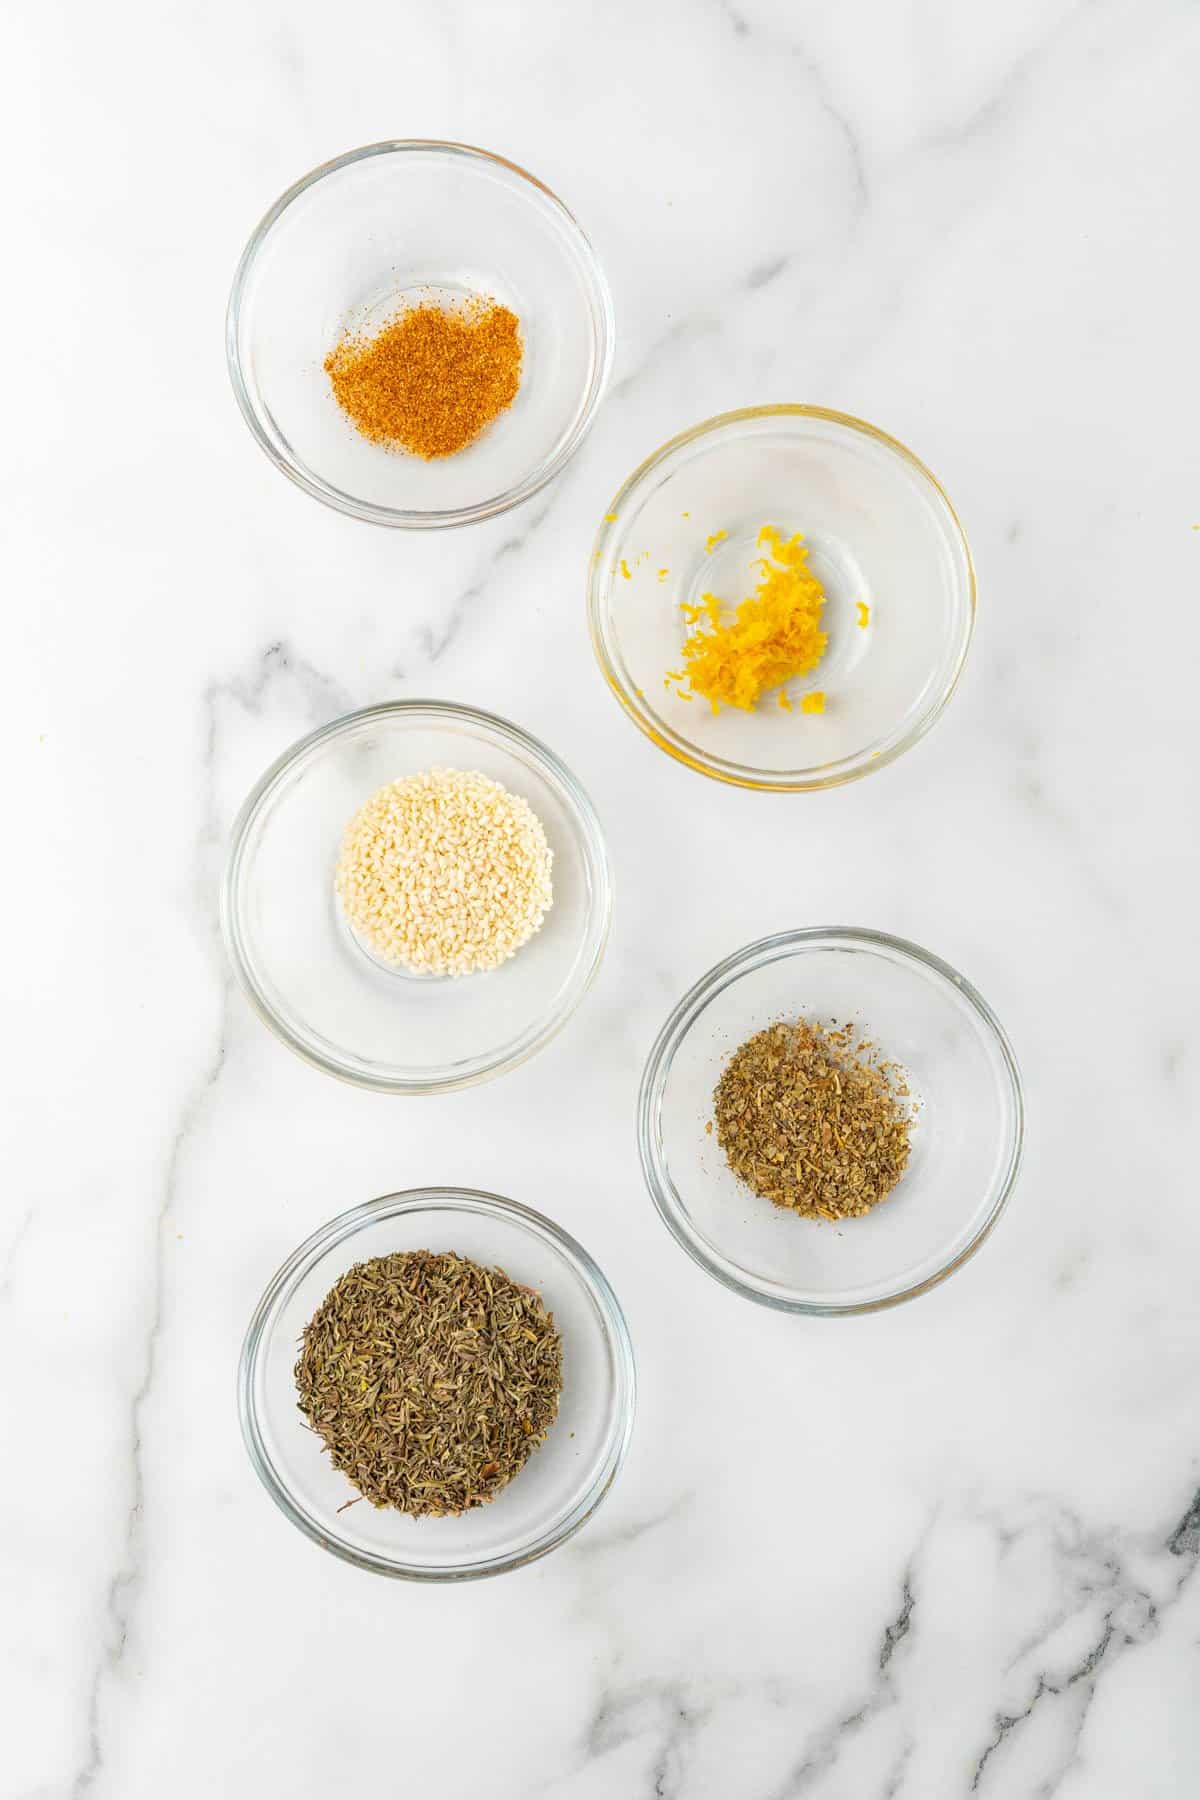 Ingredients for seasoning separated into individual ramekins, as seen from above on a white marble countertop